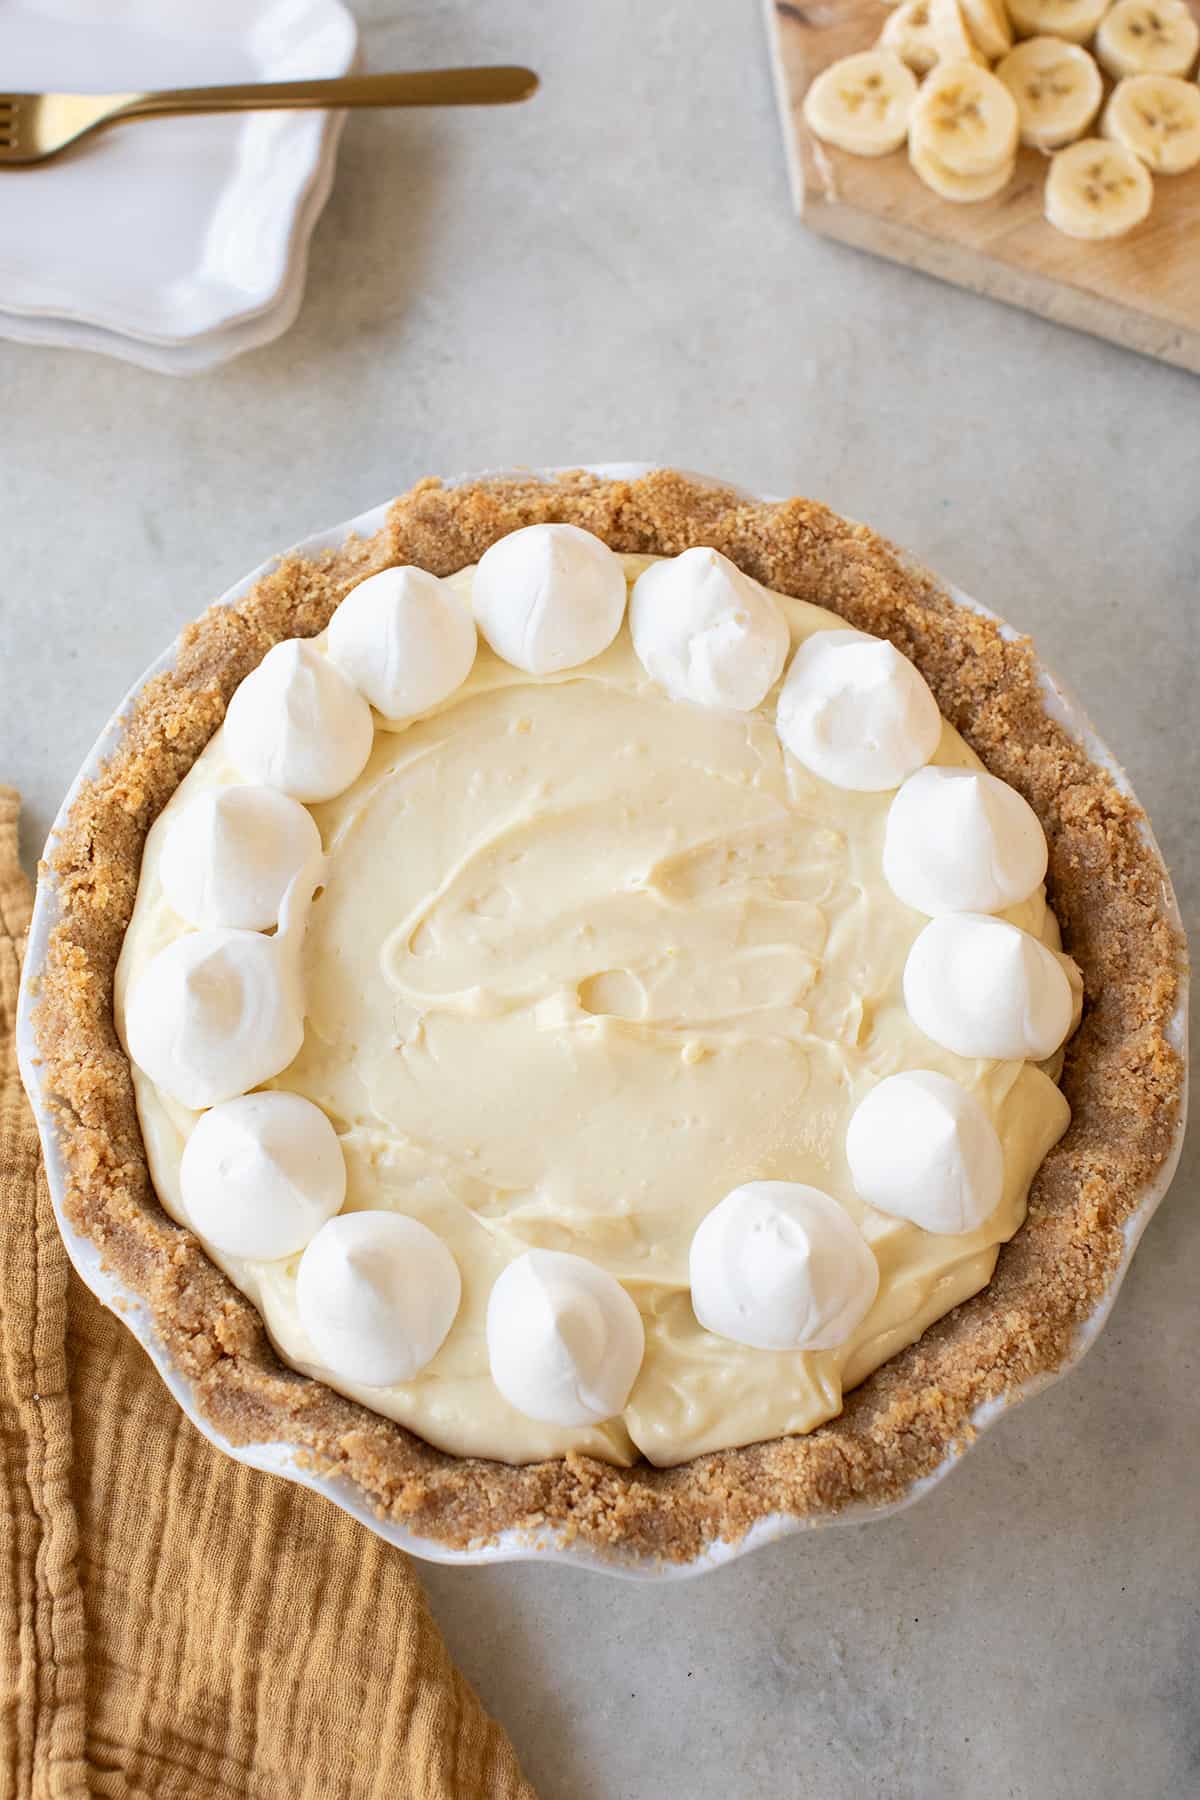 Banana pudding pie made with pudding and whipped cream.